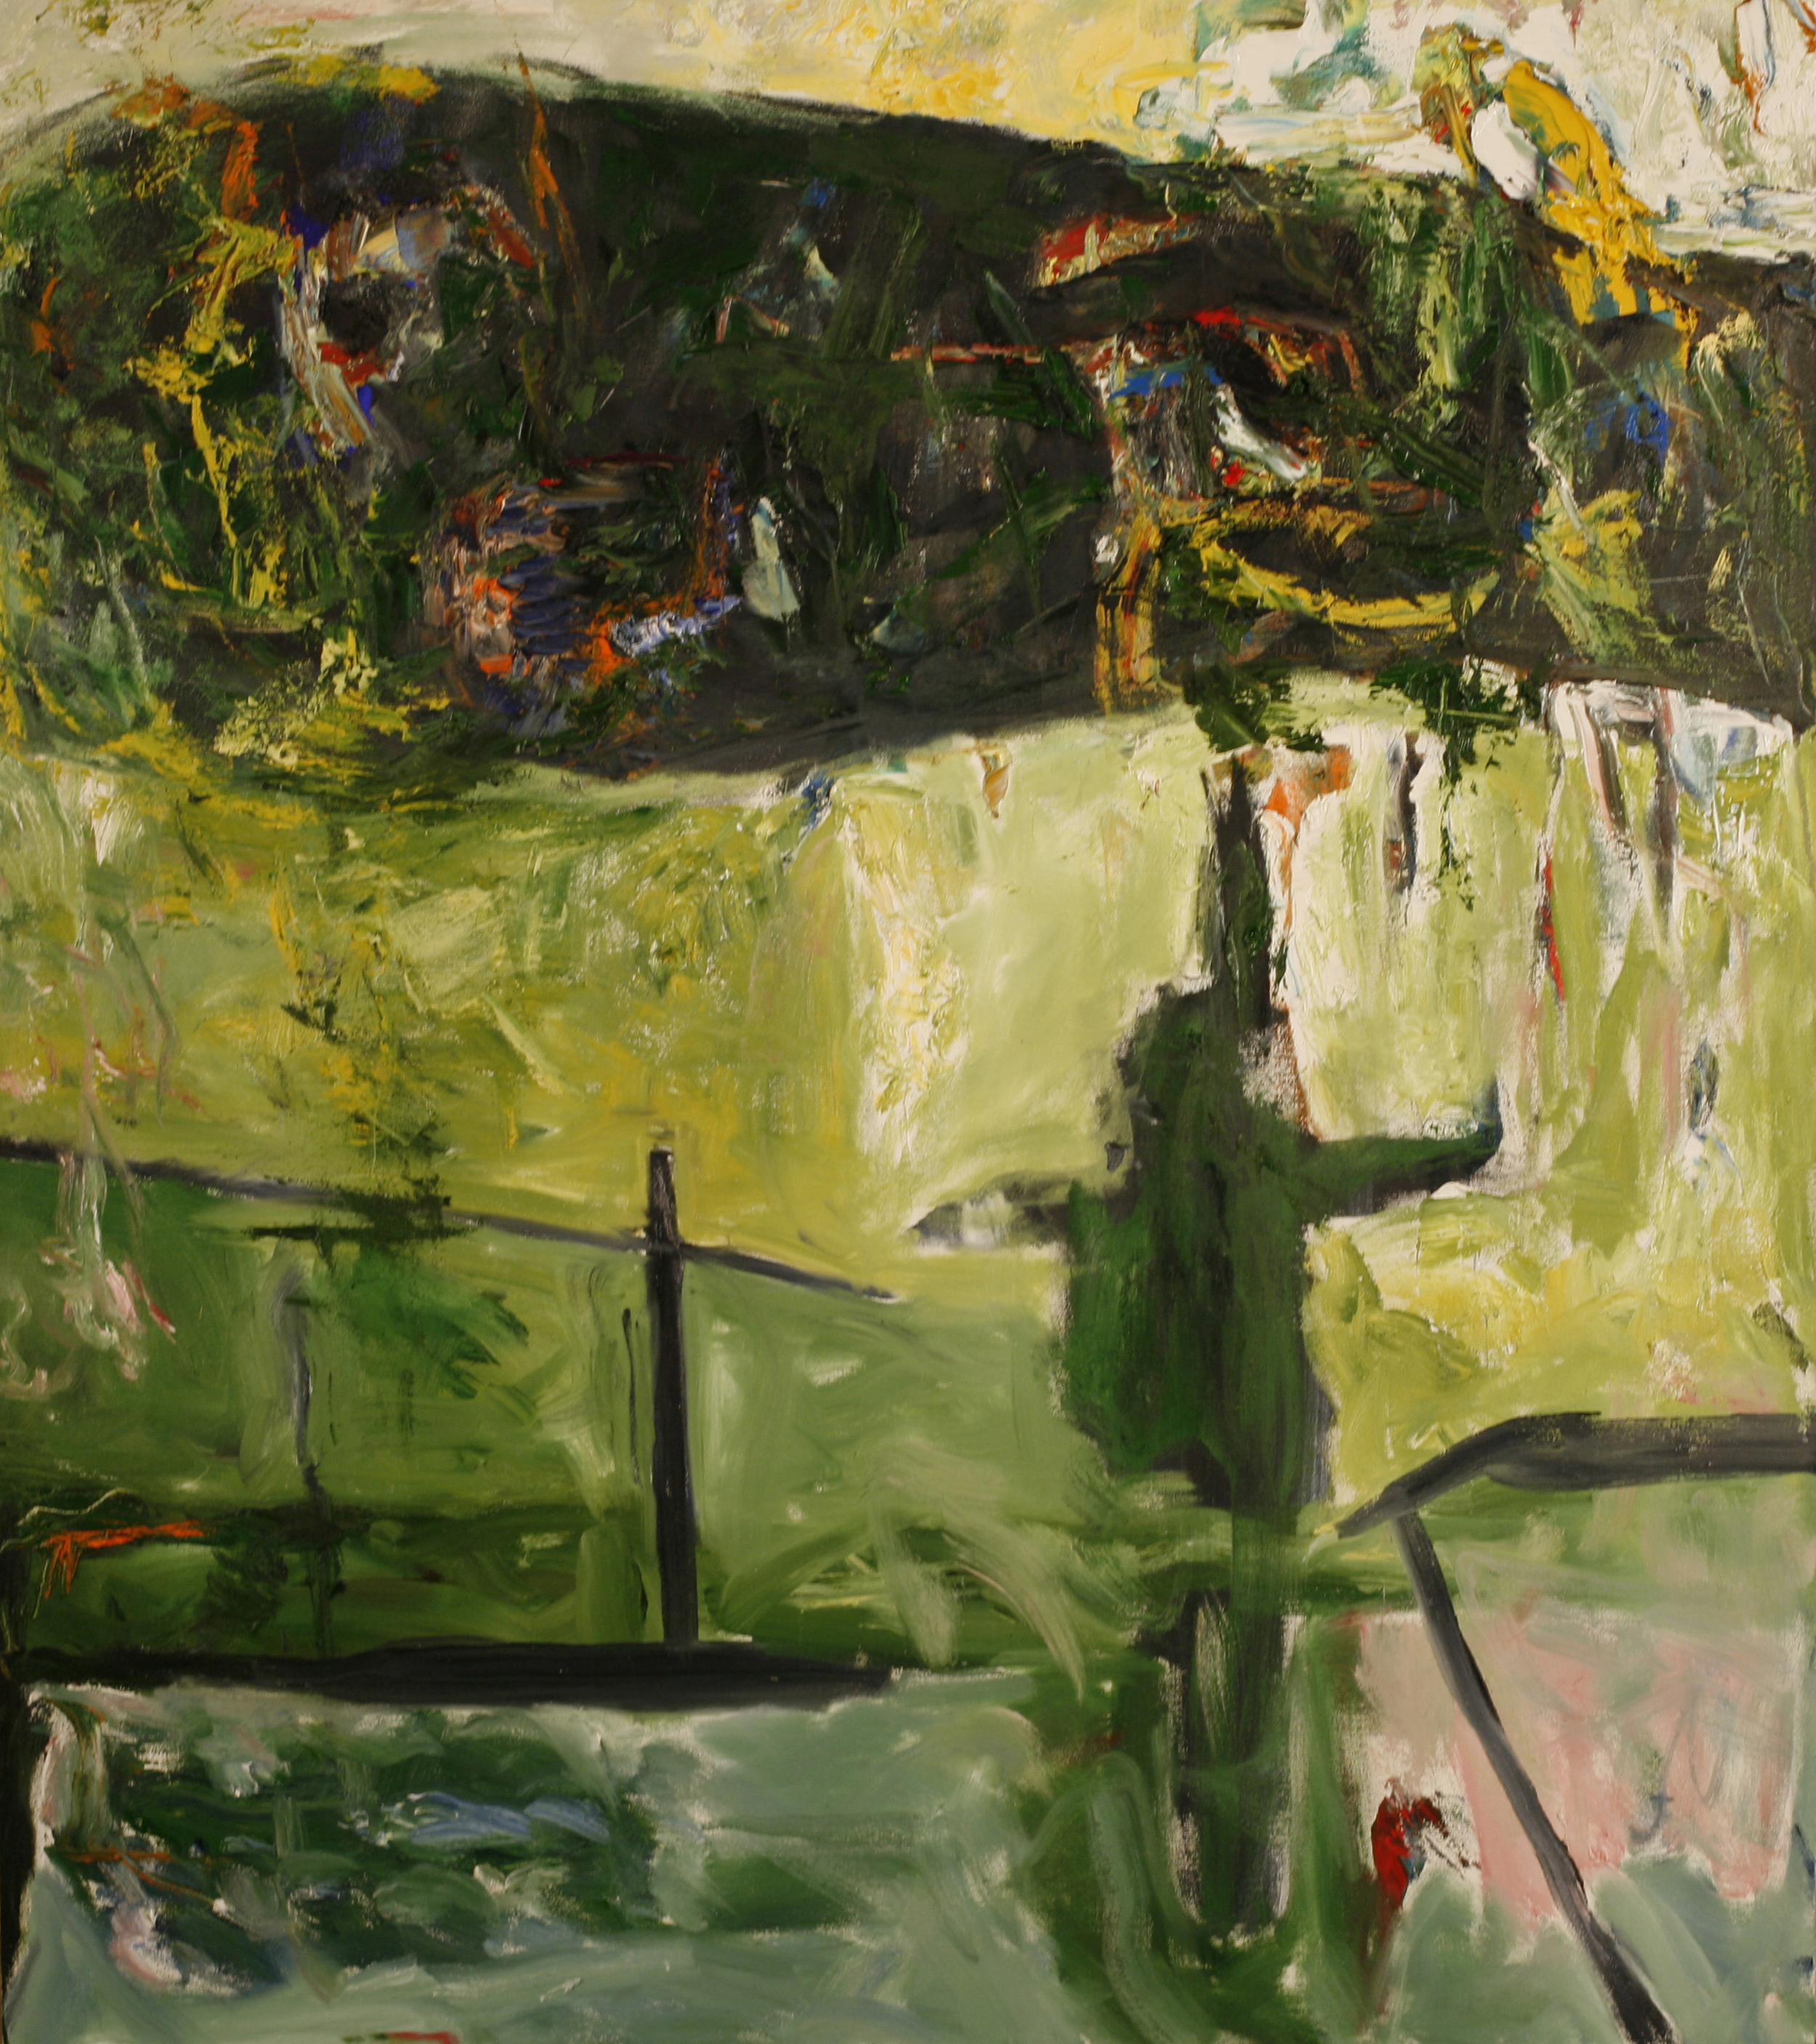 "Green Dock" Structure of Earth #79, Oil on canvas, 48"x42" 